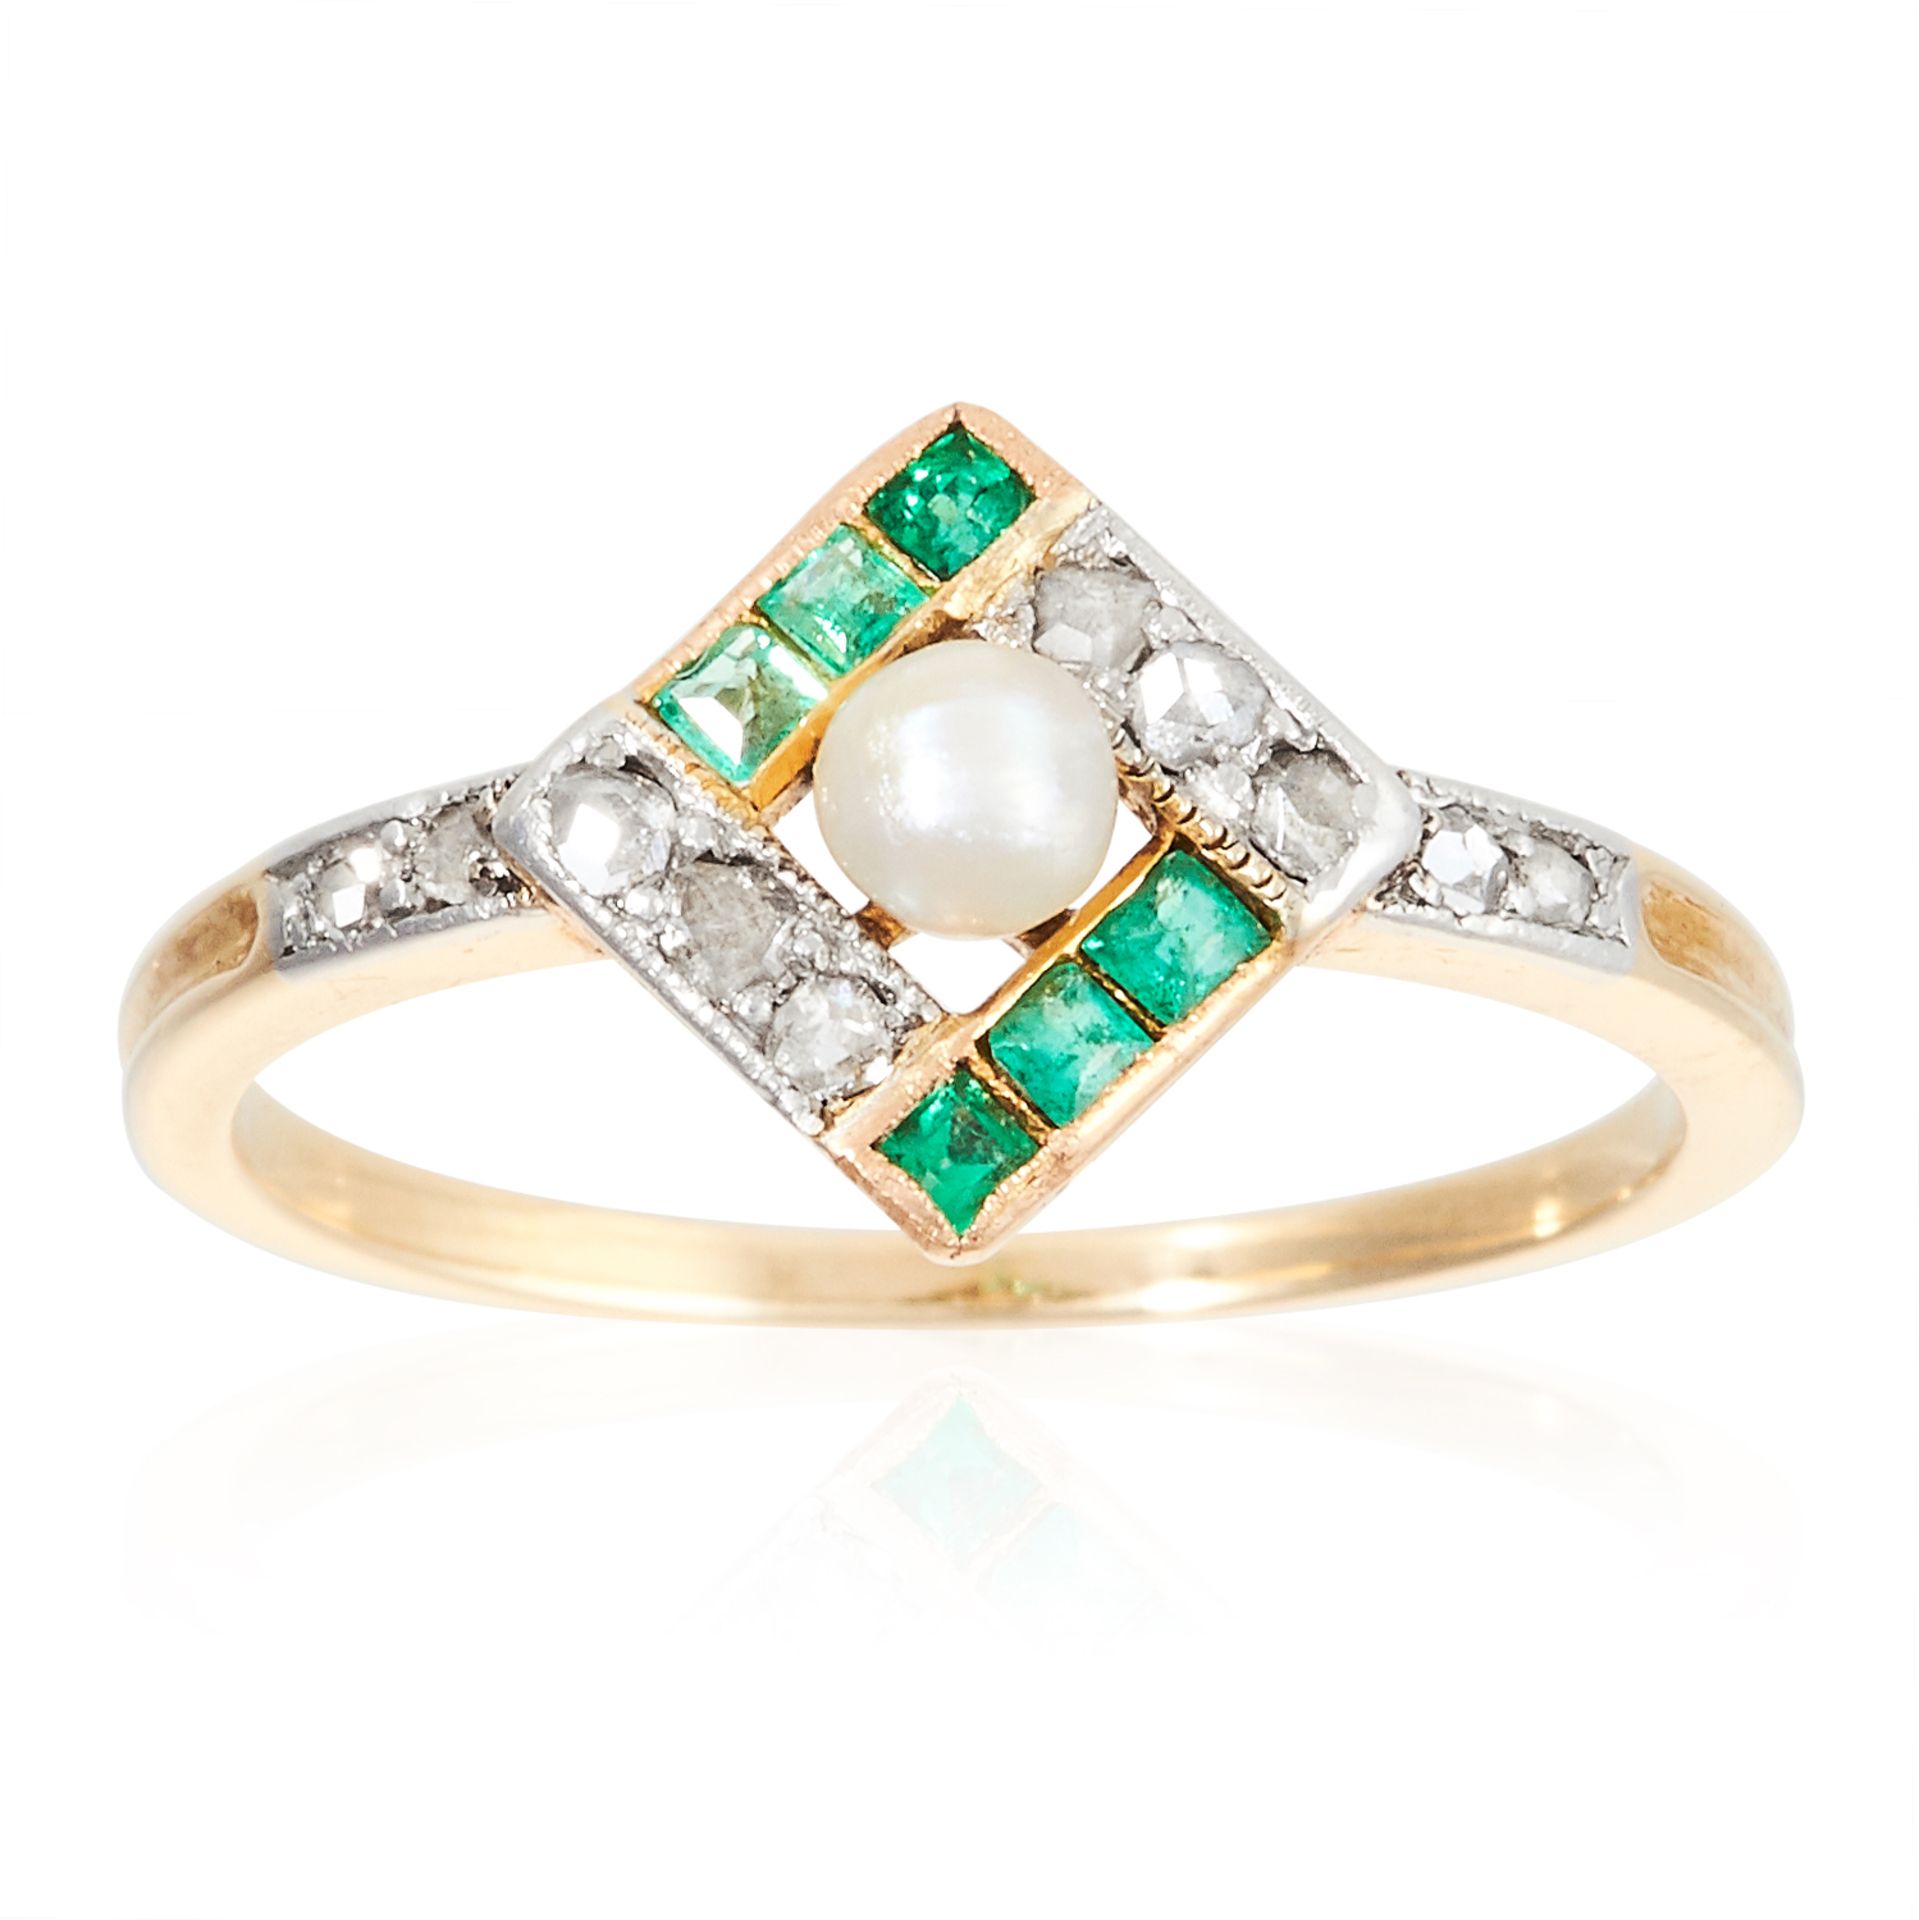 AN ART DECO PEARL, EMERALD AND DIAMOND RING in 18ct yellow gold, the central pearl within a